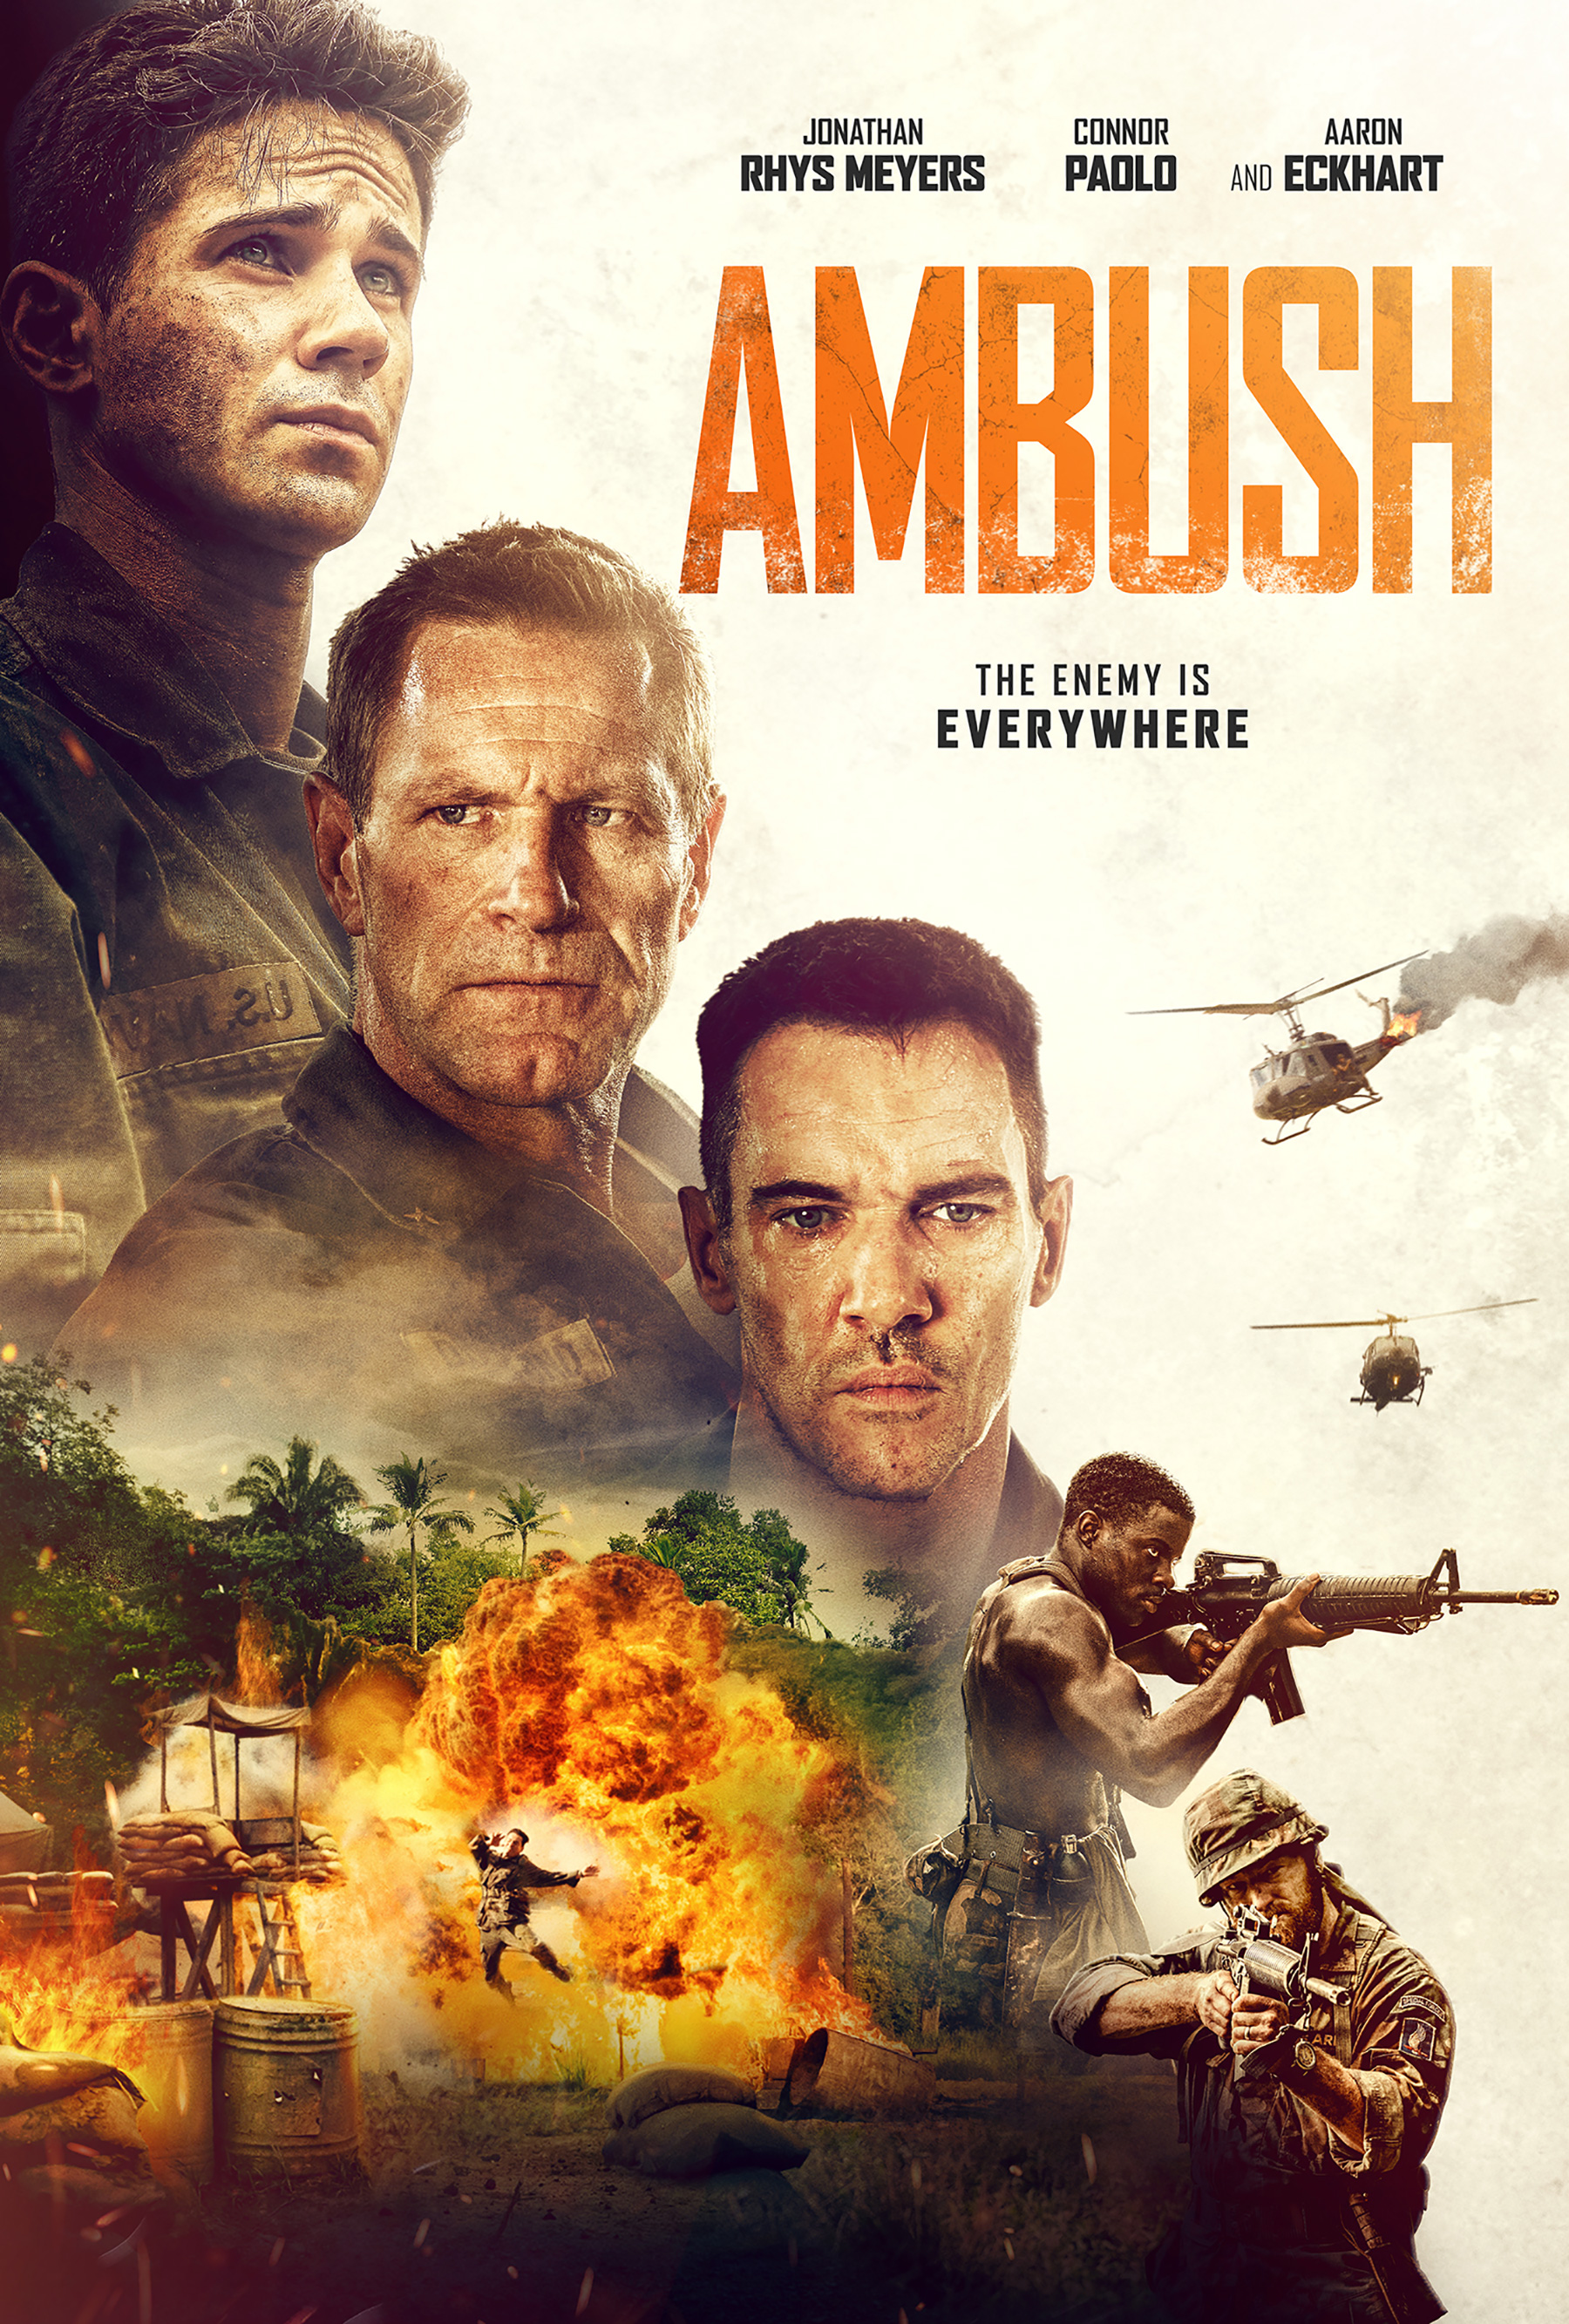 Exclusive Ambush Poster Previews Aaron EckhartLed War Movie